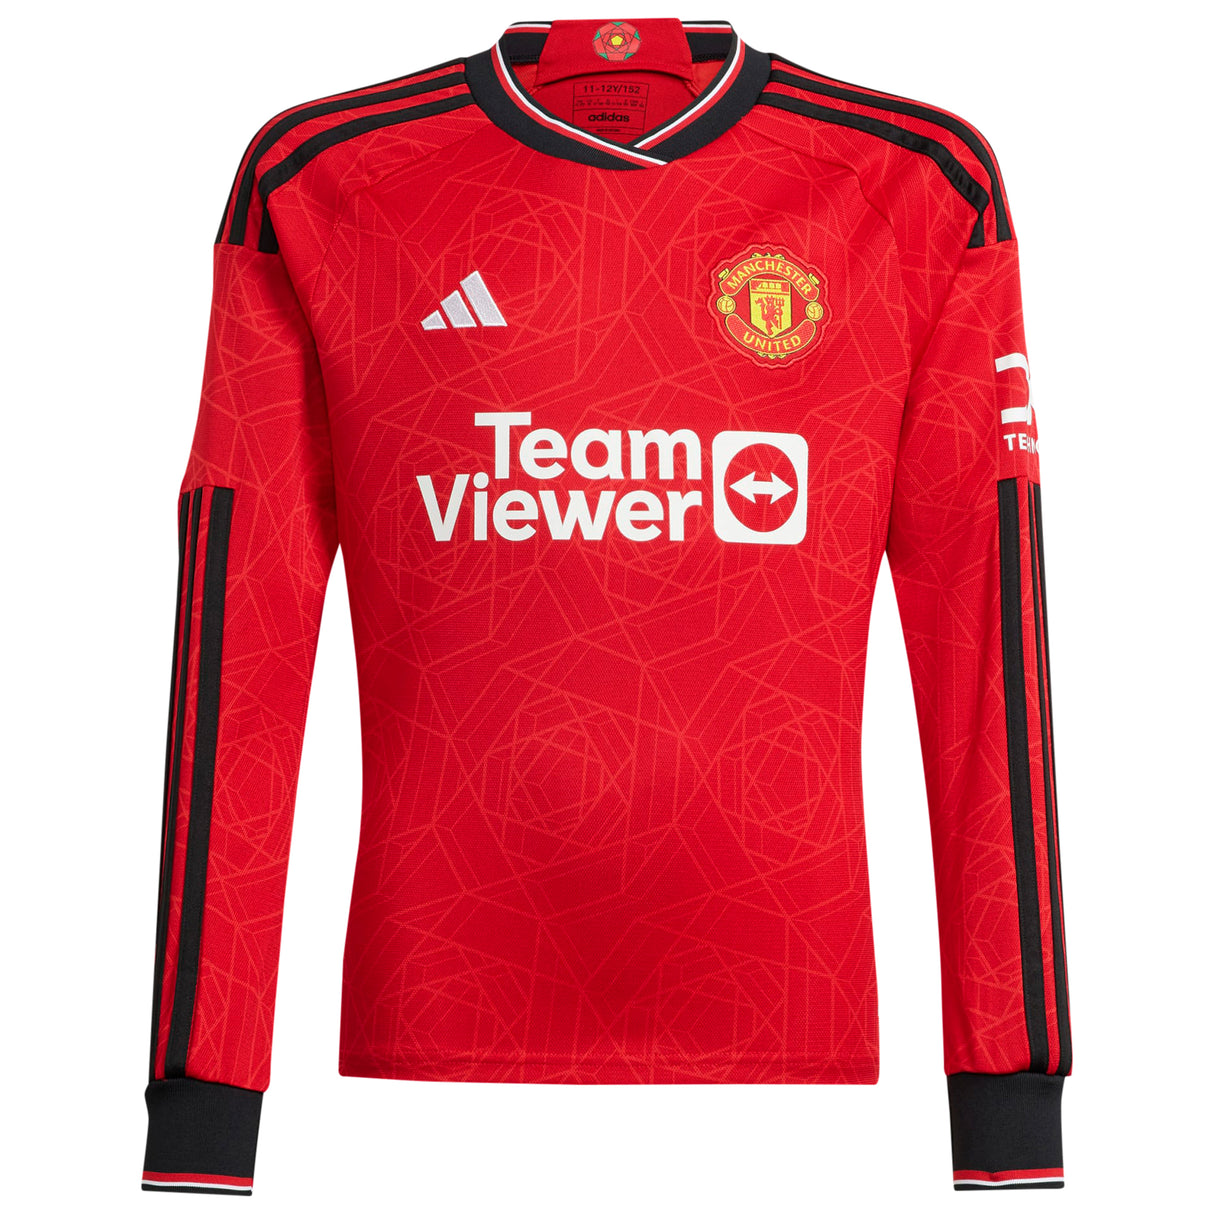 Manchester United Cup adidas Home Shirt 2023-24 - Long Sleeve - With Evans 15 Printing - Kit Captain